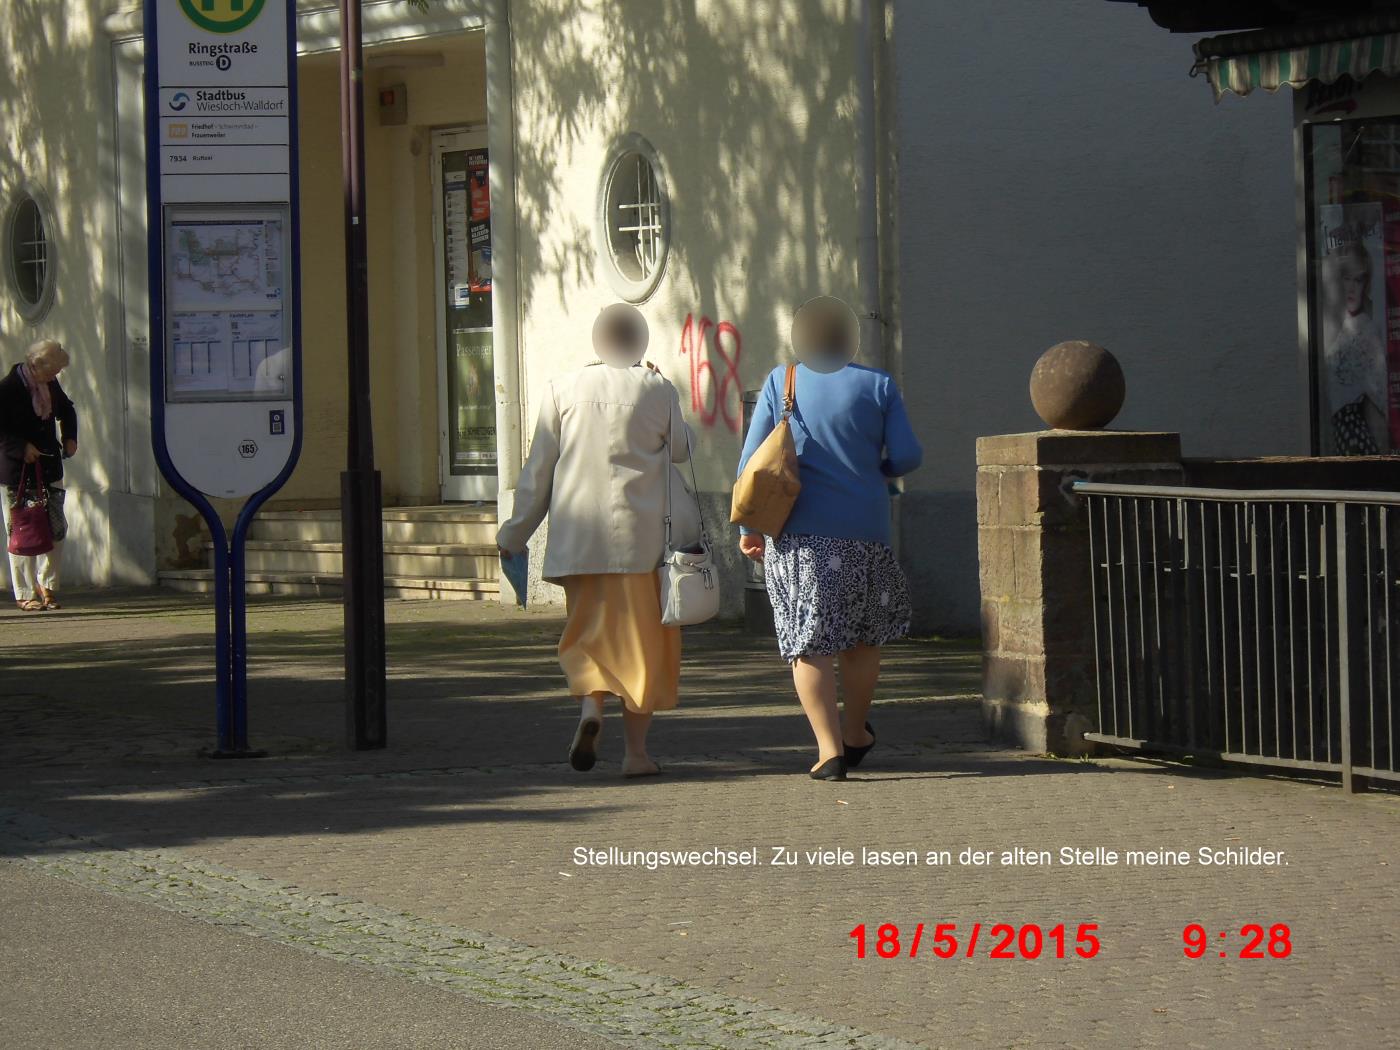 Jehovah's Witnesses are fighting for supremacy in the Wiesloch pedestrian zone